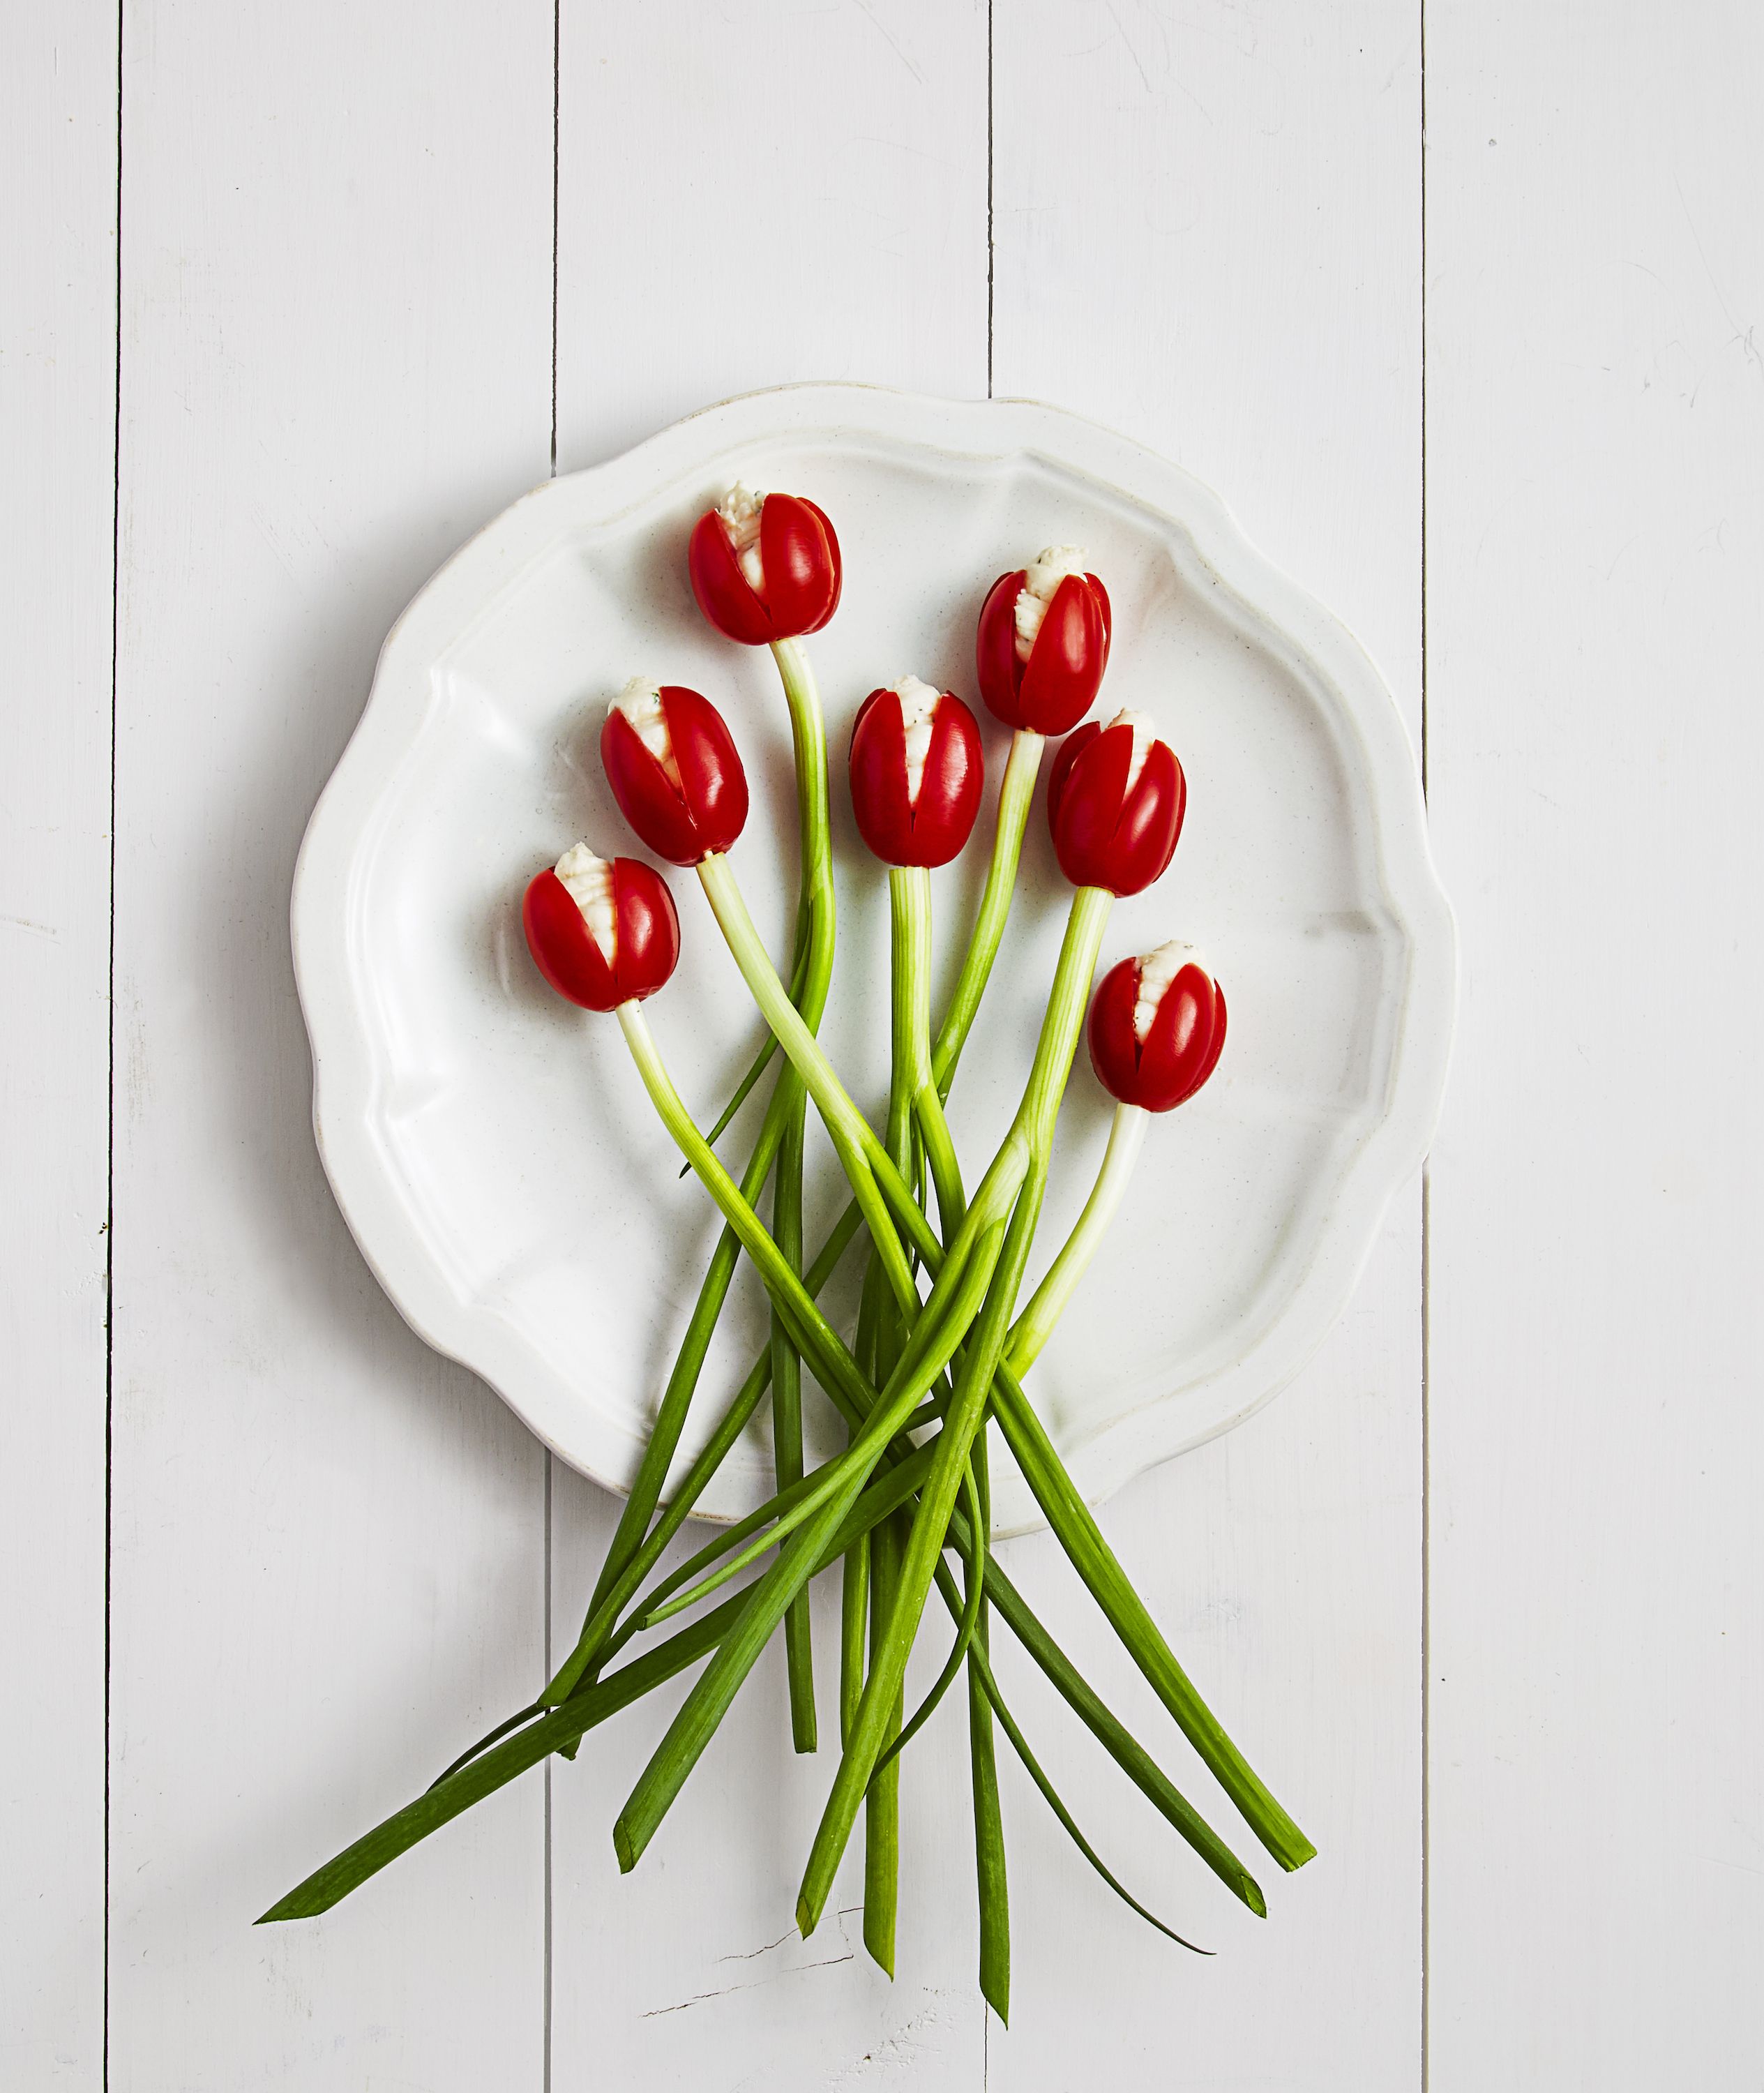 20 Ways to Make Your Food Look Like Flowers - Flower-Shaped Foods